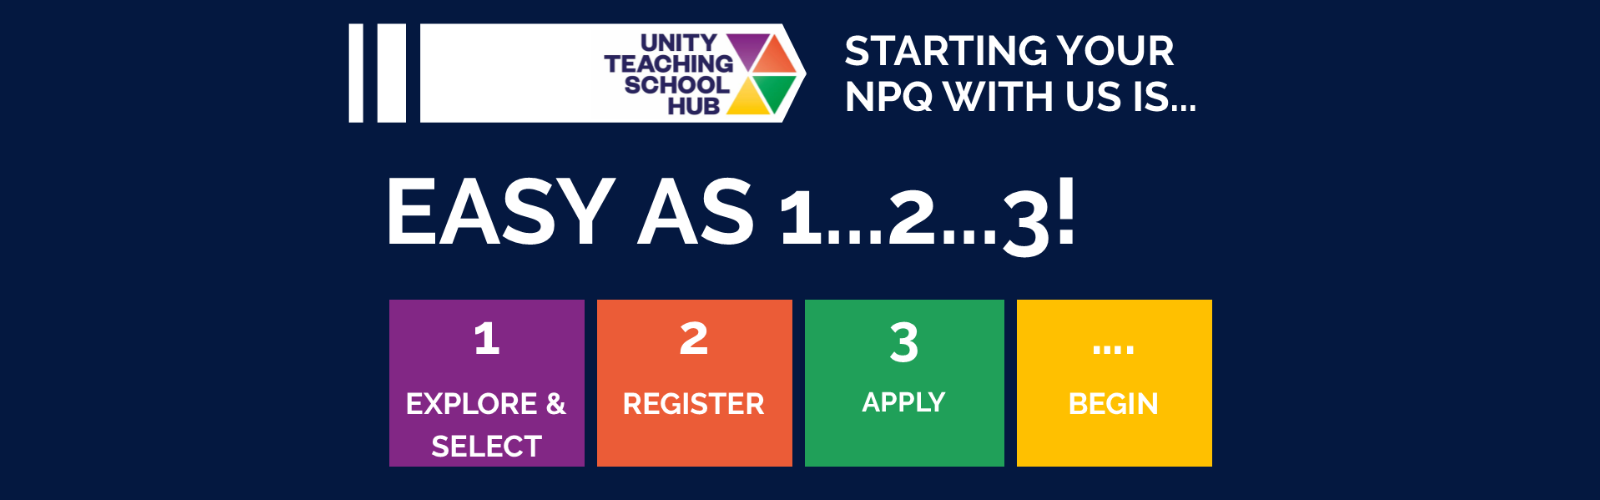 Starting an NPQ is as easy as 1, 2, 3